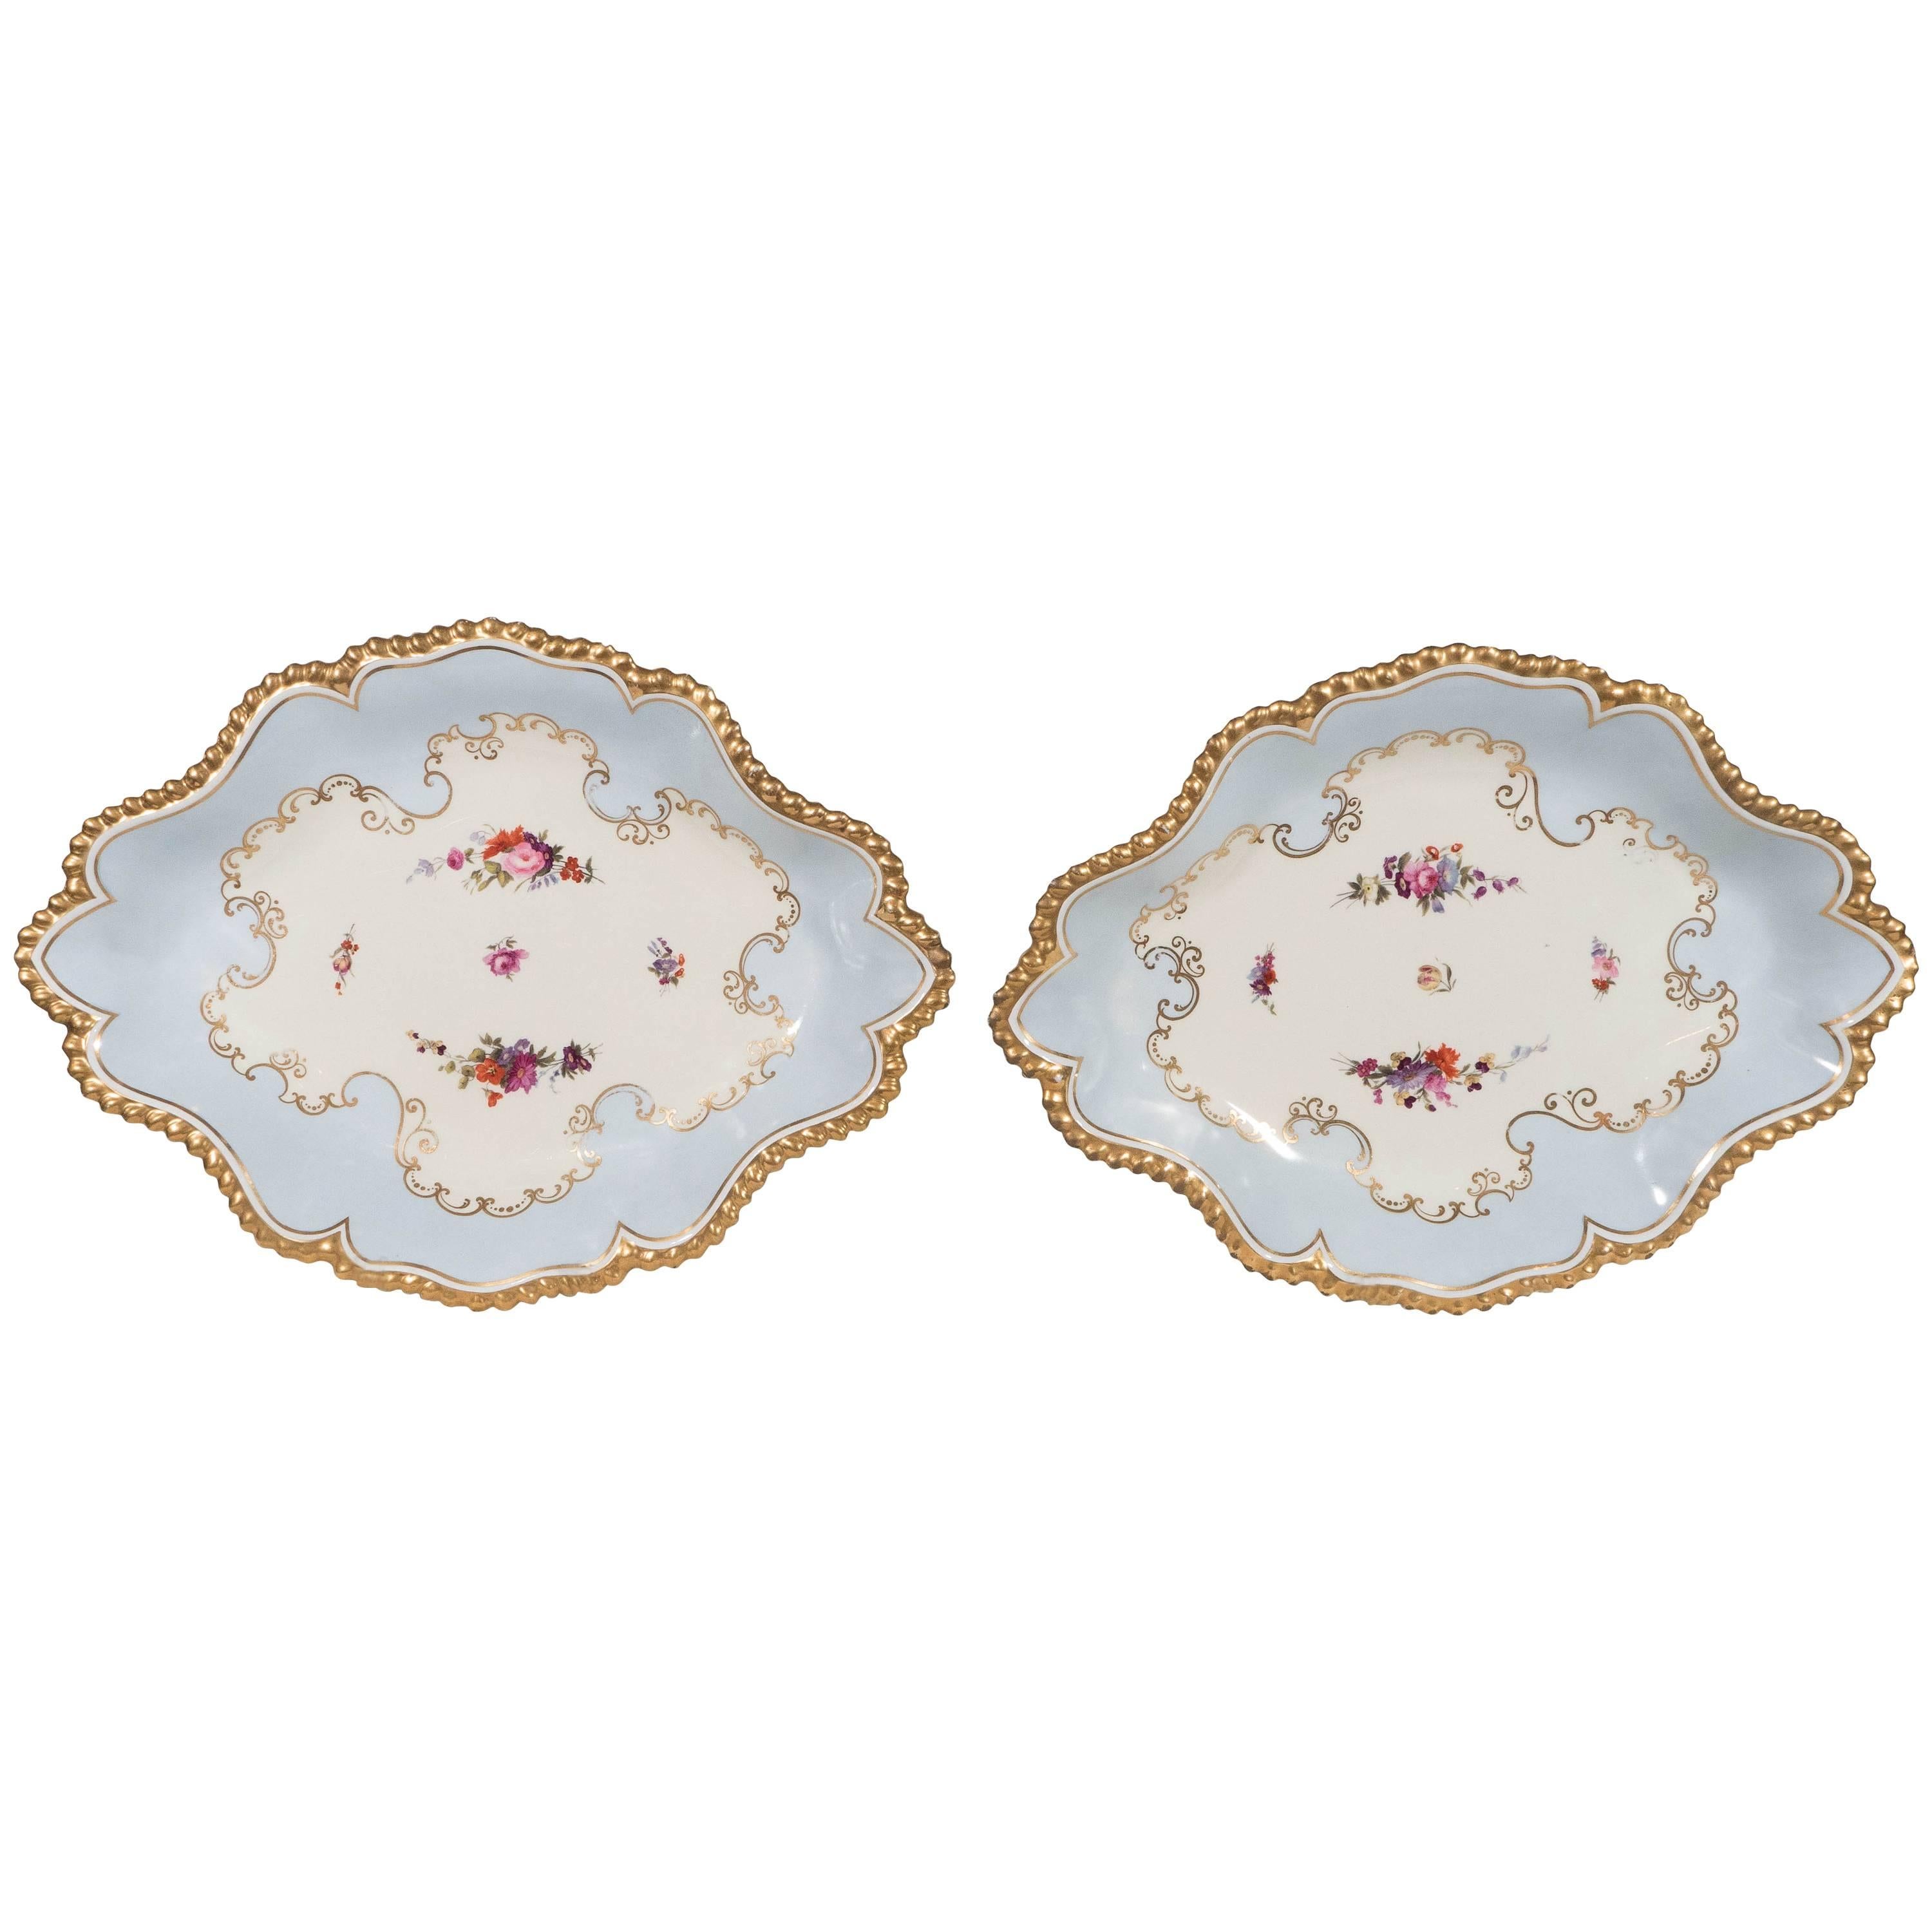 Pair Antique Worcester Porcelain Dishes Made in England circa 1820